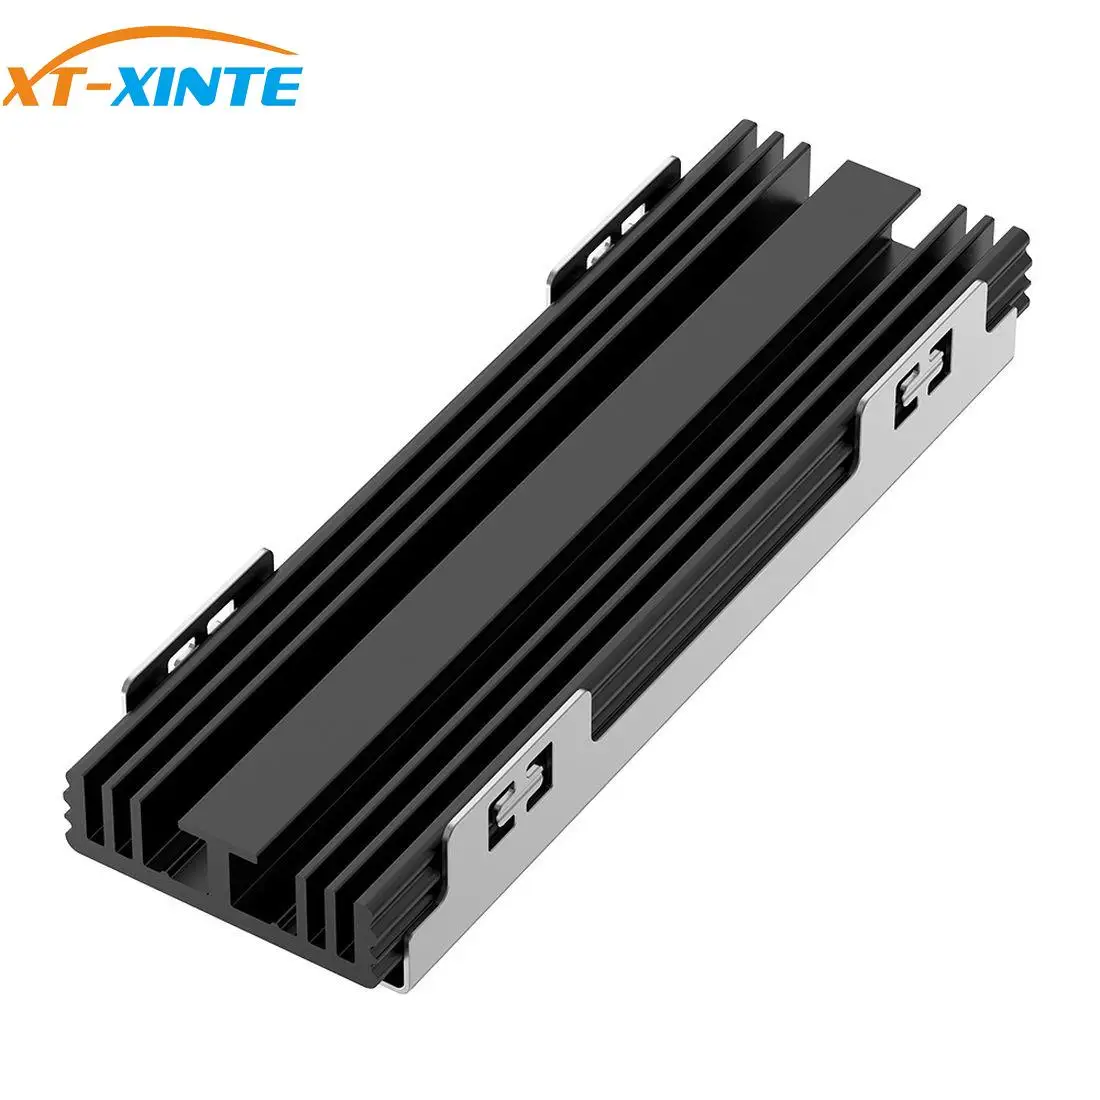 

XT-XINTE M.2 Solid State Hard Disk Heatsink Heat Radiator Cooling Silicon Therma Pads Cooler for NGFF NVME SATA 2280 PCIE SSD